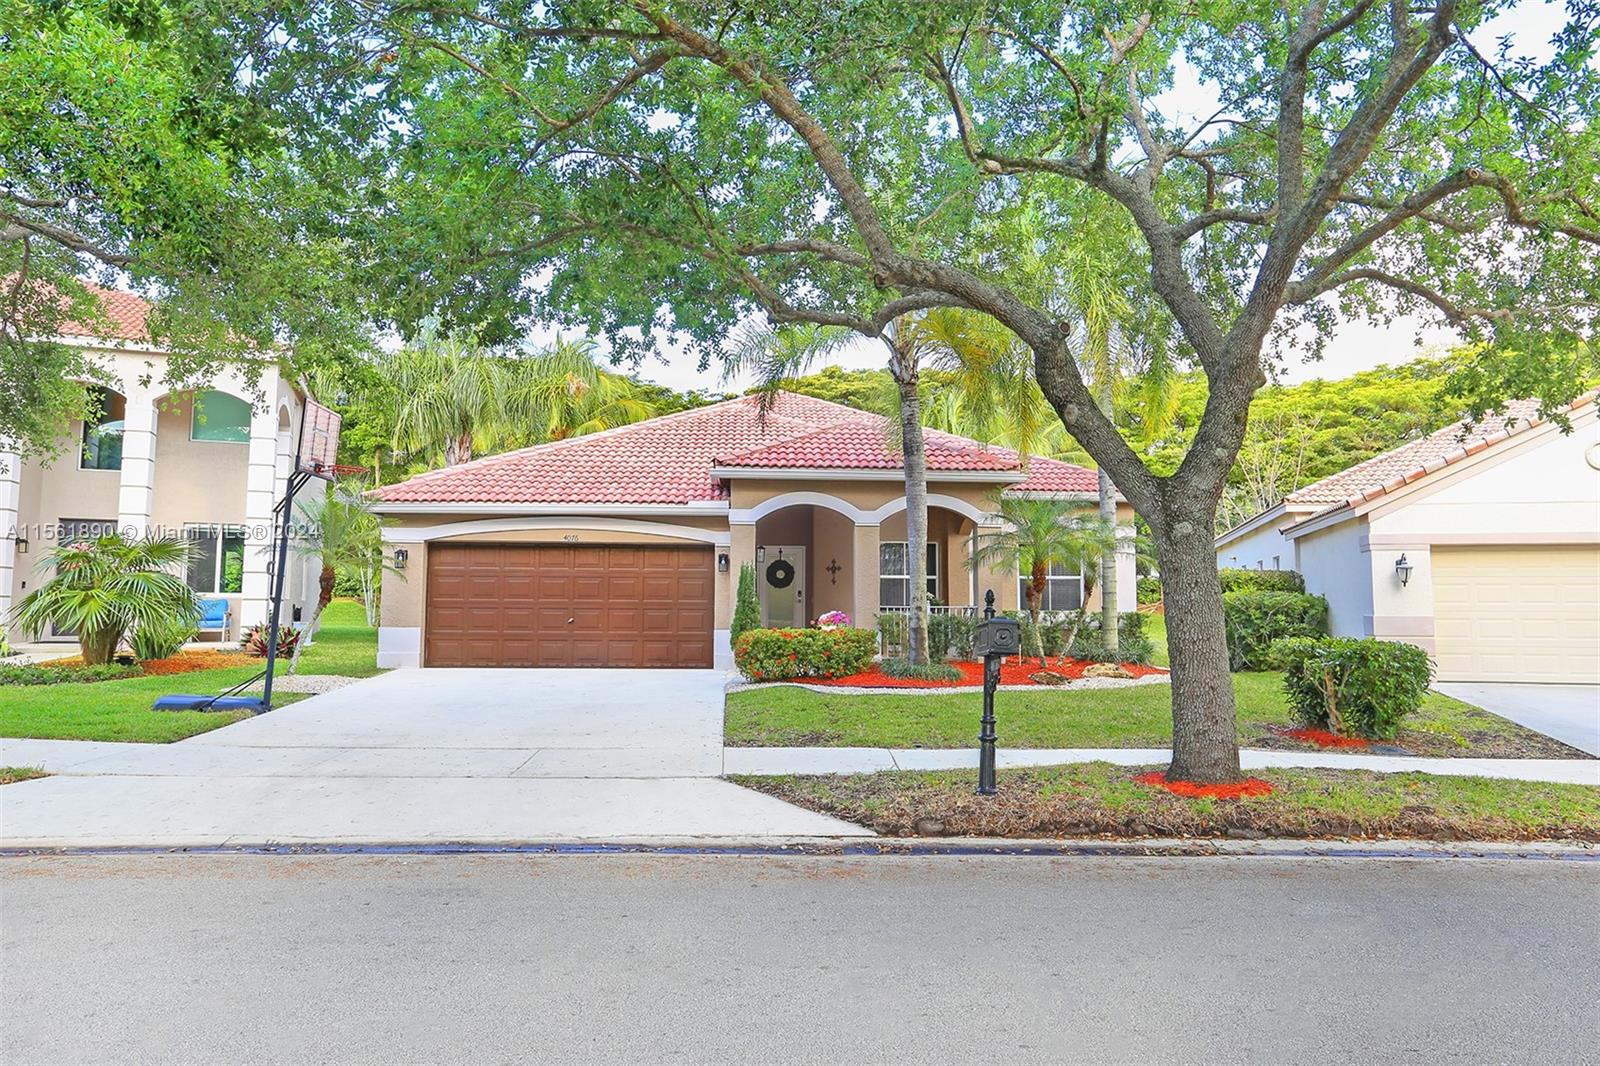 4076 Staghorn Ln, Weston, Florida 33331, 4 Bedrooms Bedrooms, ,2 BathroomsBathrooms,Residential,For Sale,4076 Staghorn Ln,A11561890